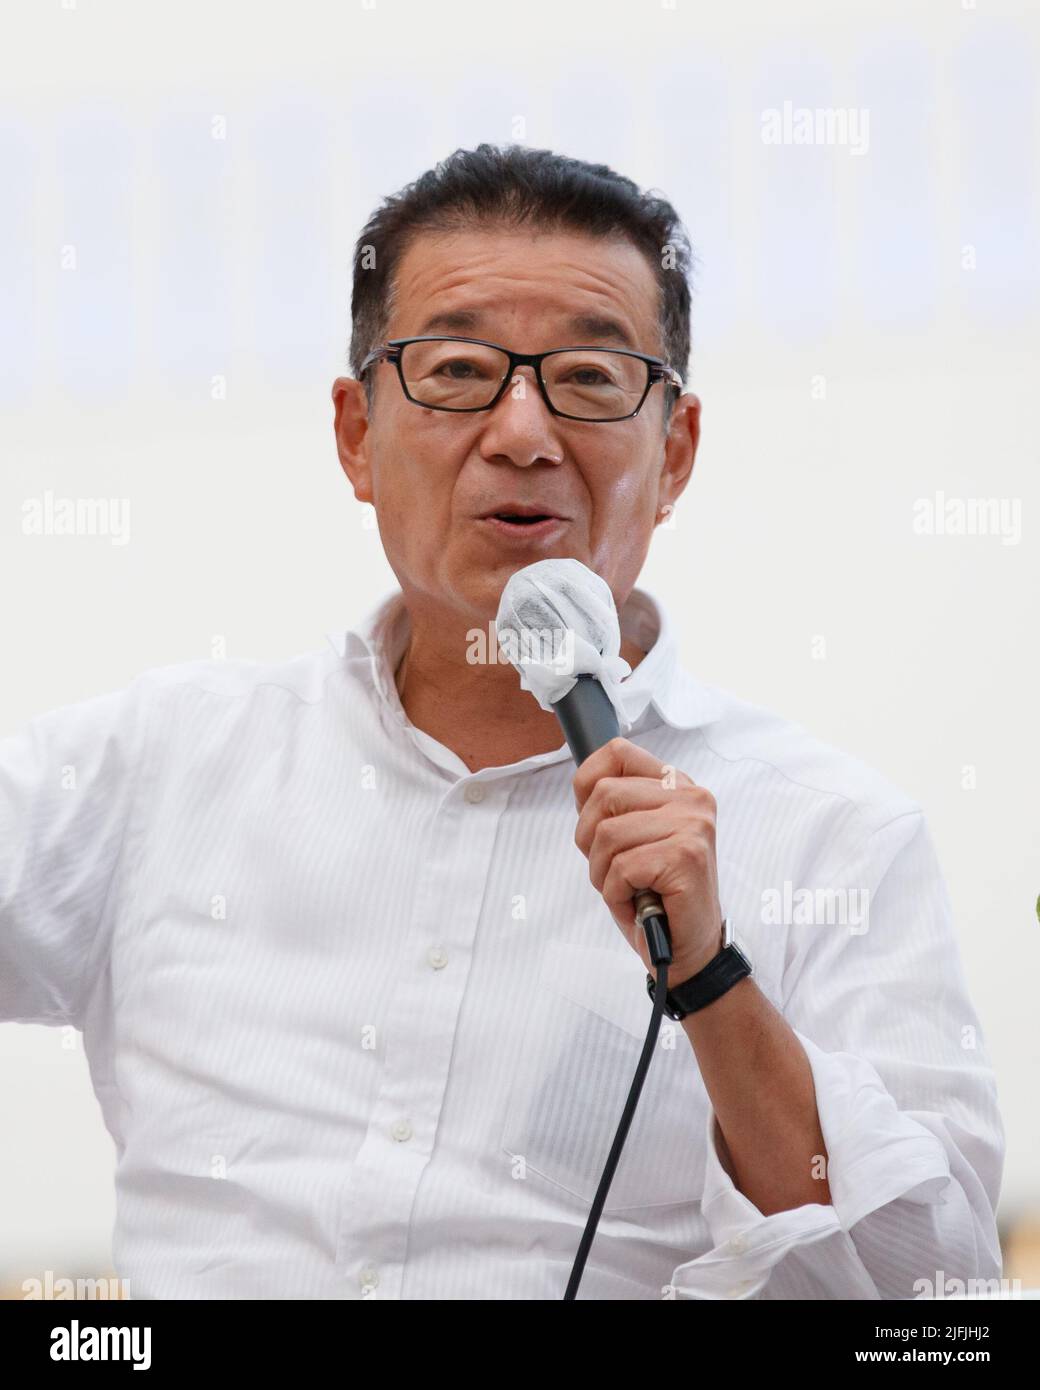 Leader of Japan Innovation Party, Ichiro Matsui appeals to voters to speak in support of the his party's candidates Naoki Inose and Yuki Ebisawa during an Upper House electio campaign in Tokyo, Japan on July, 02, 2022. (Photo Motoo Naka/AFLO) Stock Photo